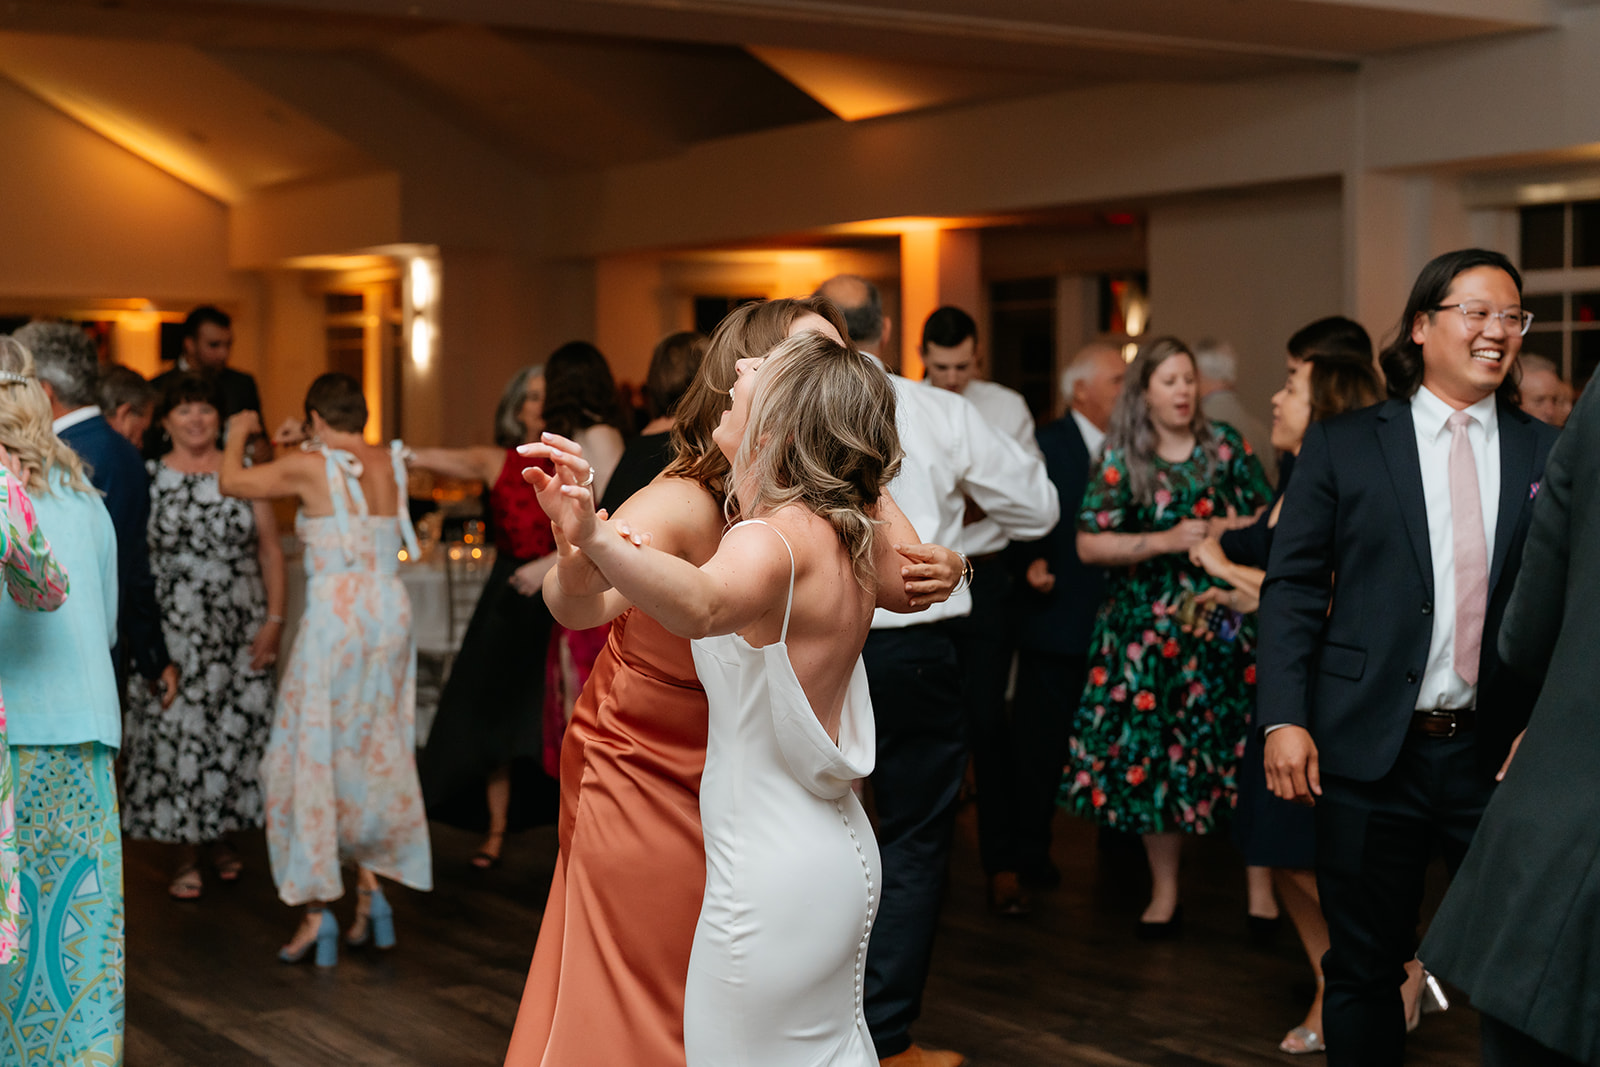 A joyful bride and groom dancing together at their wedding reception in Granite Links celebrating their special day with love and happiness.